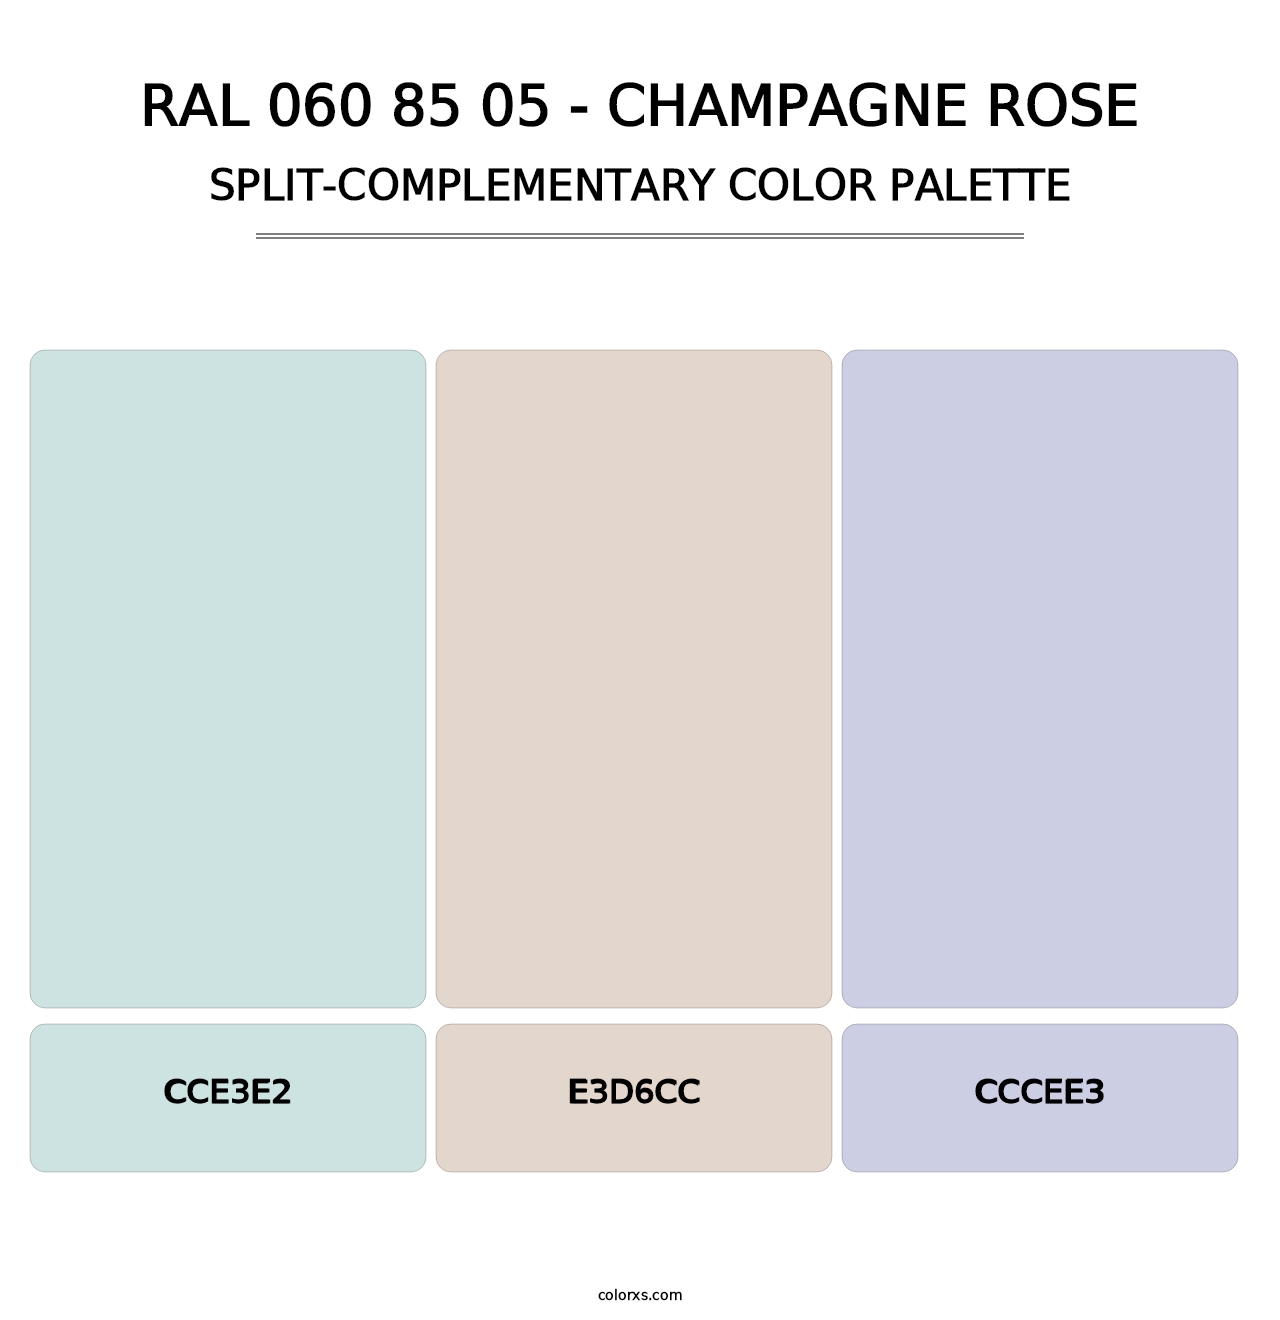 RAL 060 85 05 - Champagne Rose - Split-Complementary Color Palette